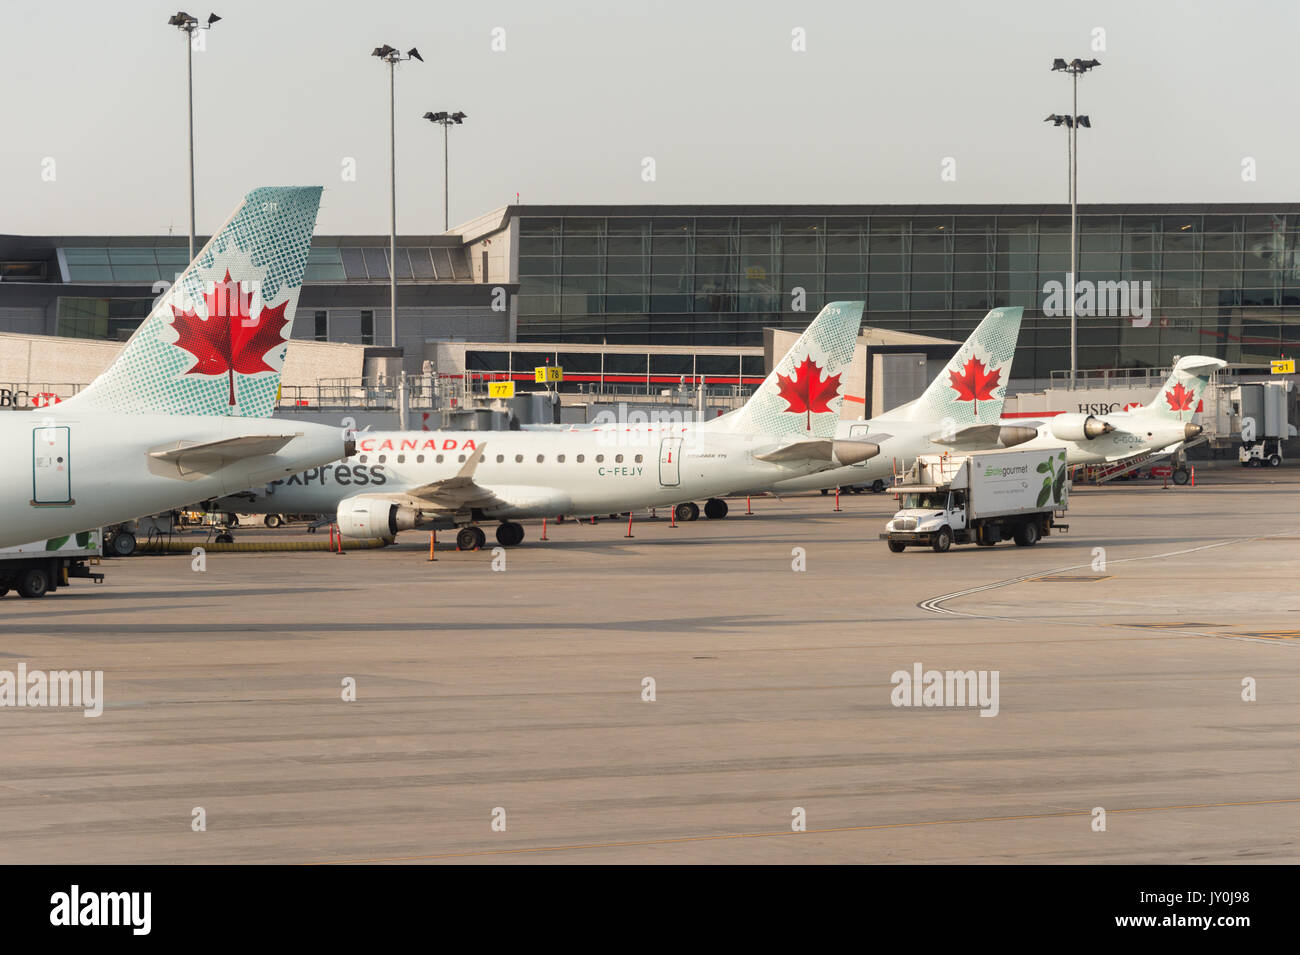 Air Canada commercial planes on the tarmac of Montreal Pierre Elliott Trudeau International Airport Stock Photo